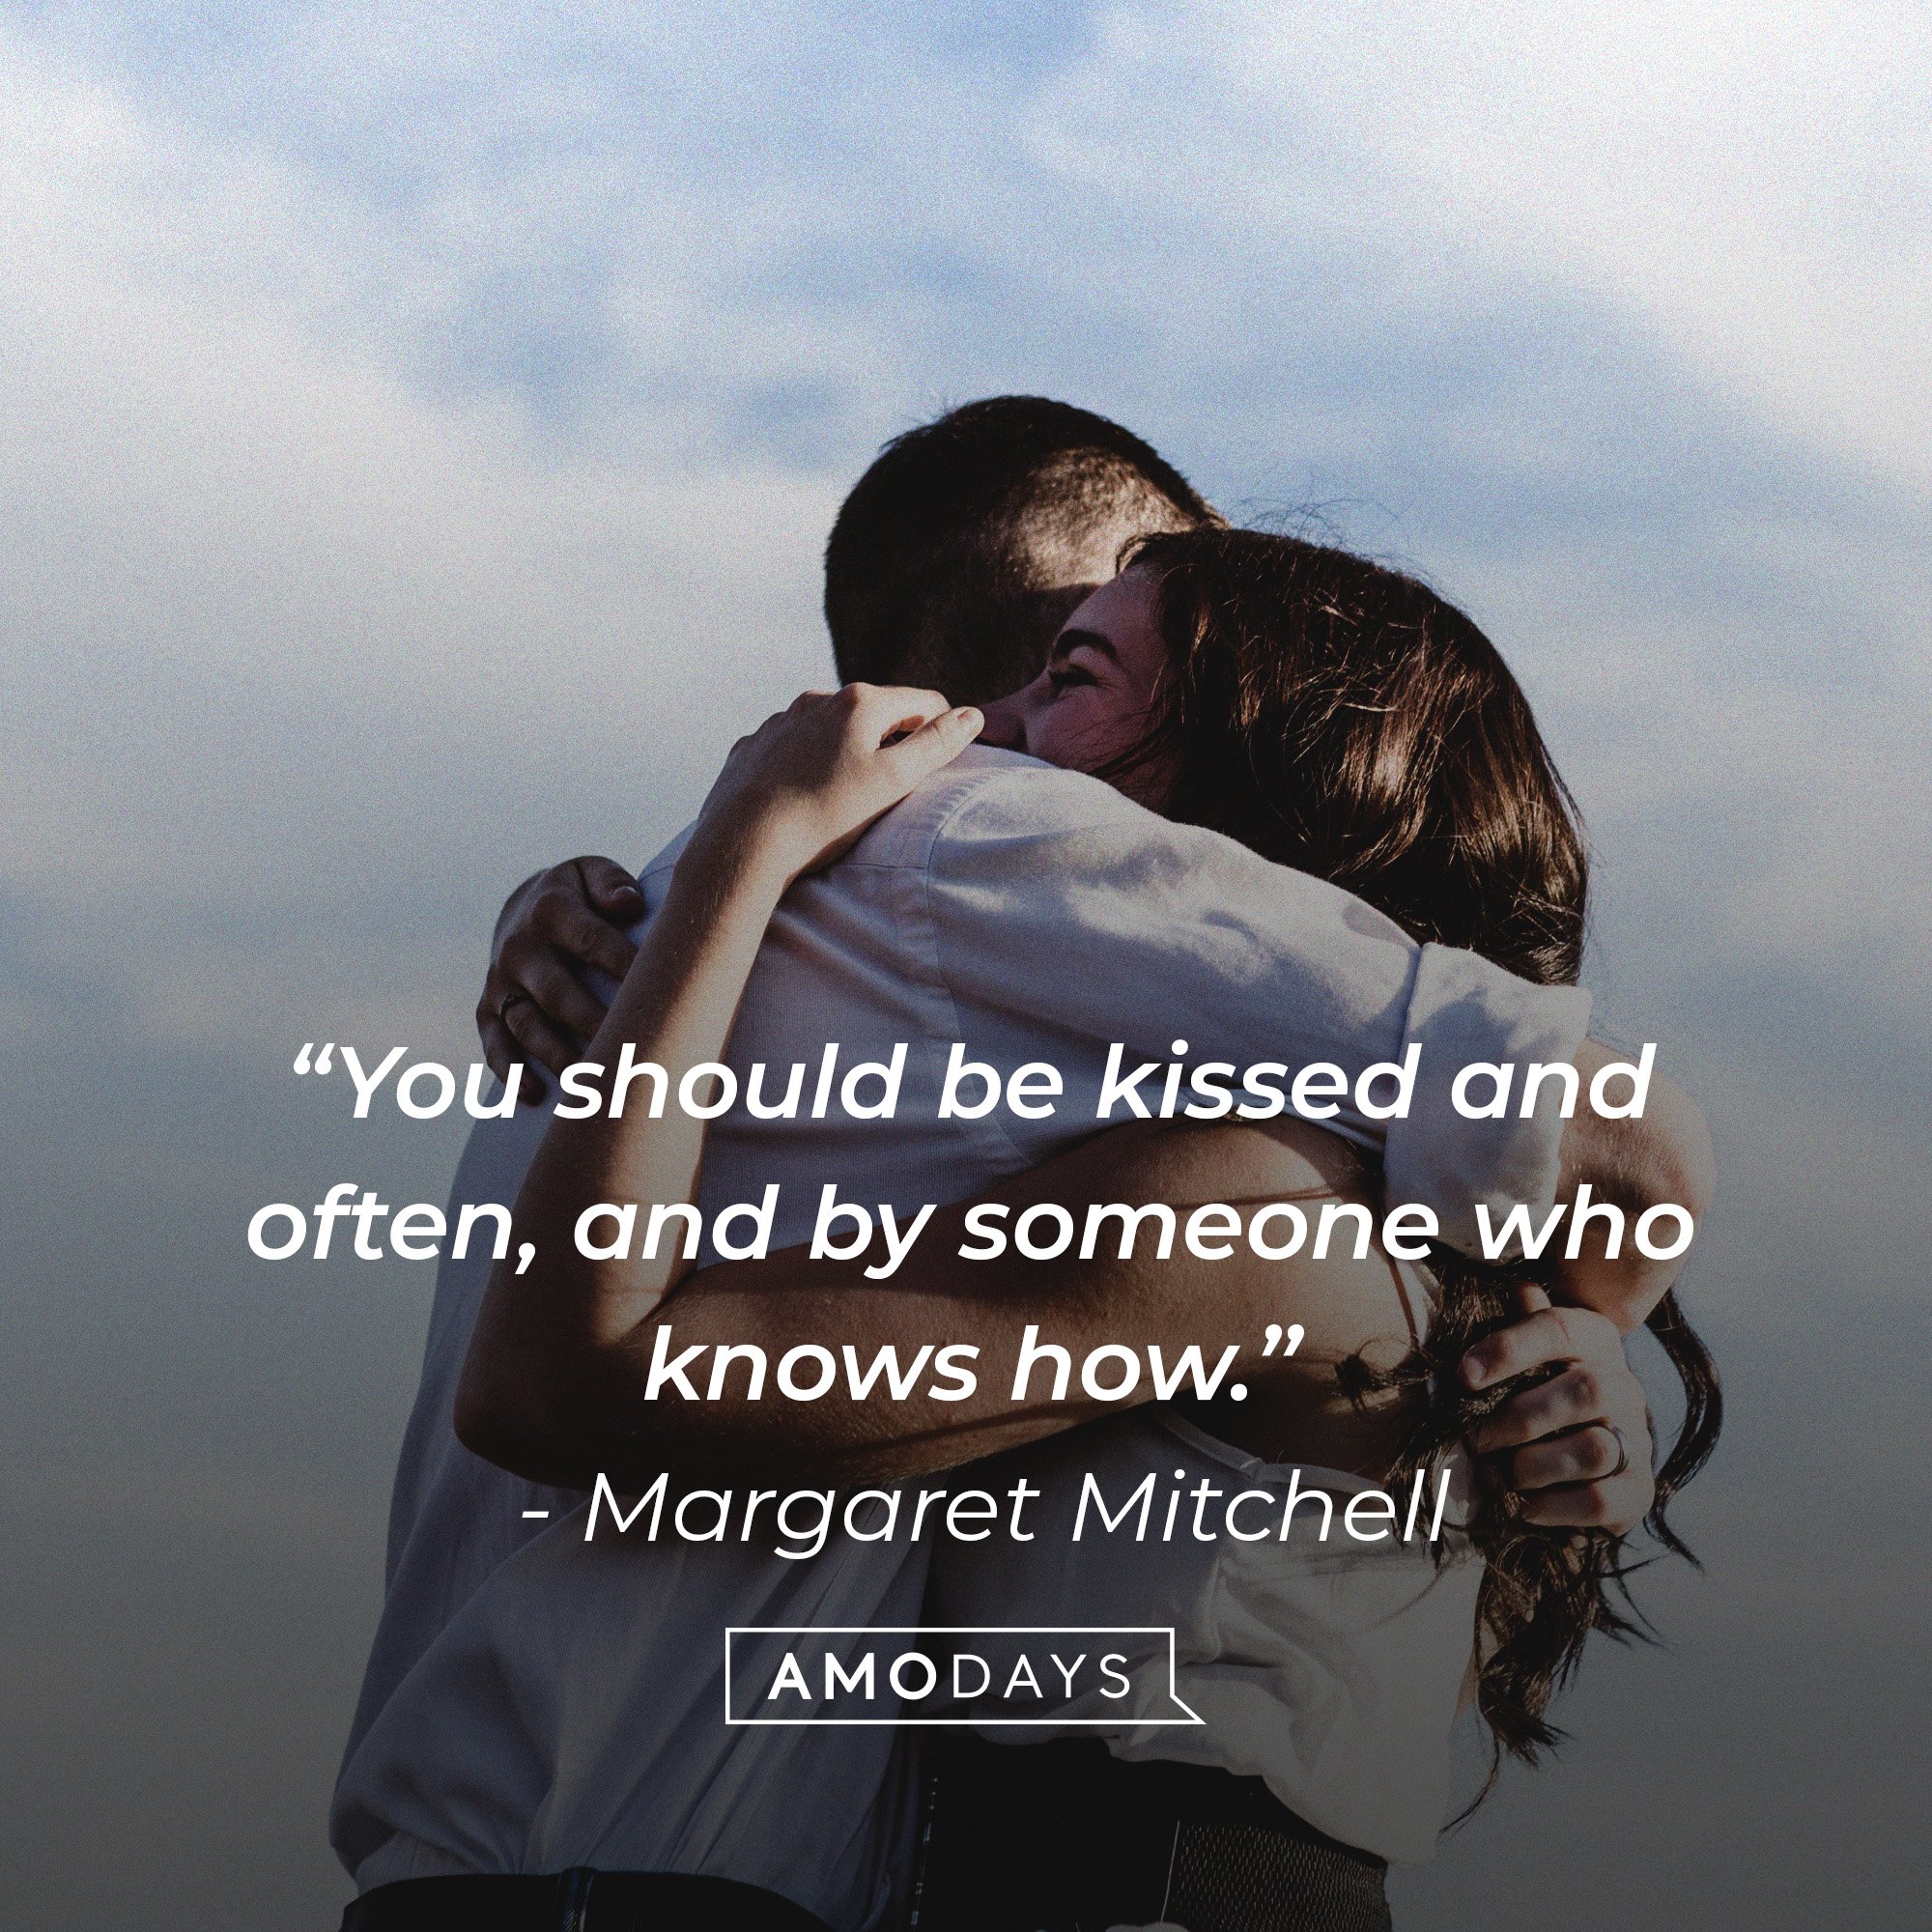  Margaret Mitchell's quote: “You should be kissed and often, and by someone who knows how.” | Image: Amodays